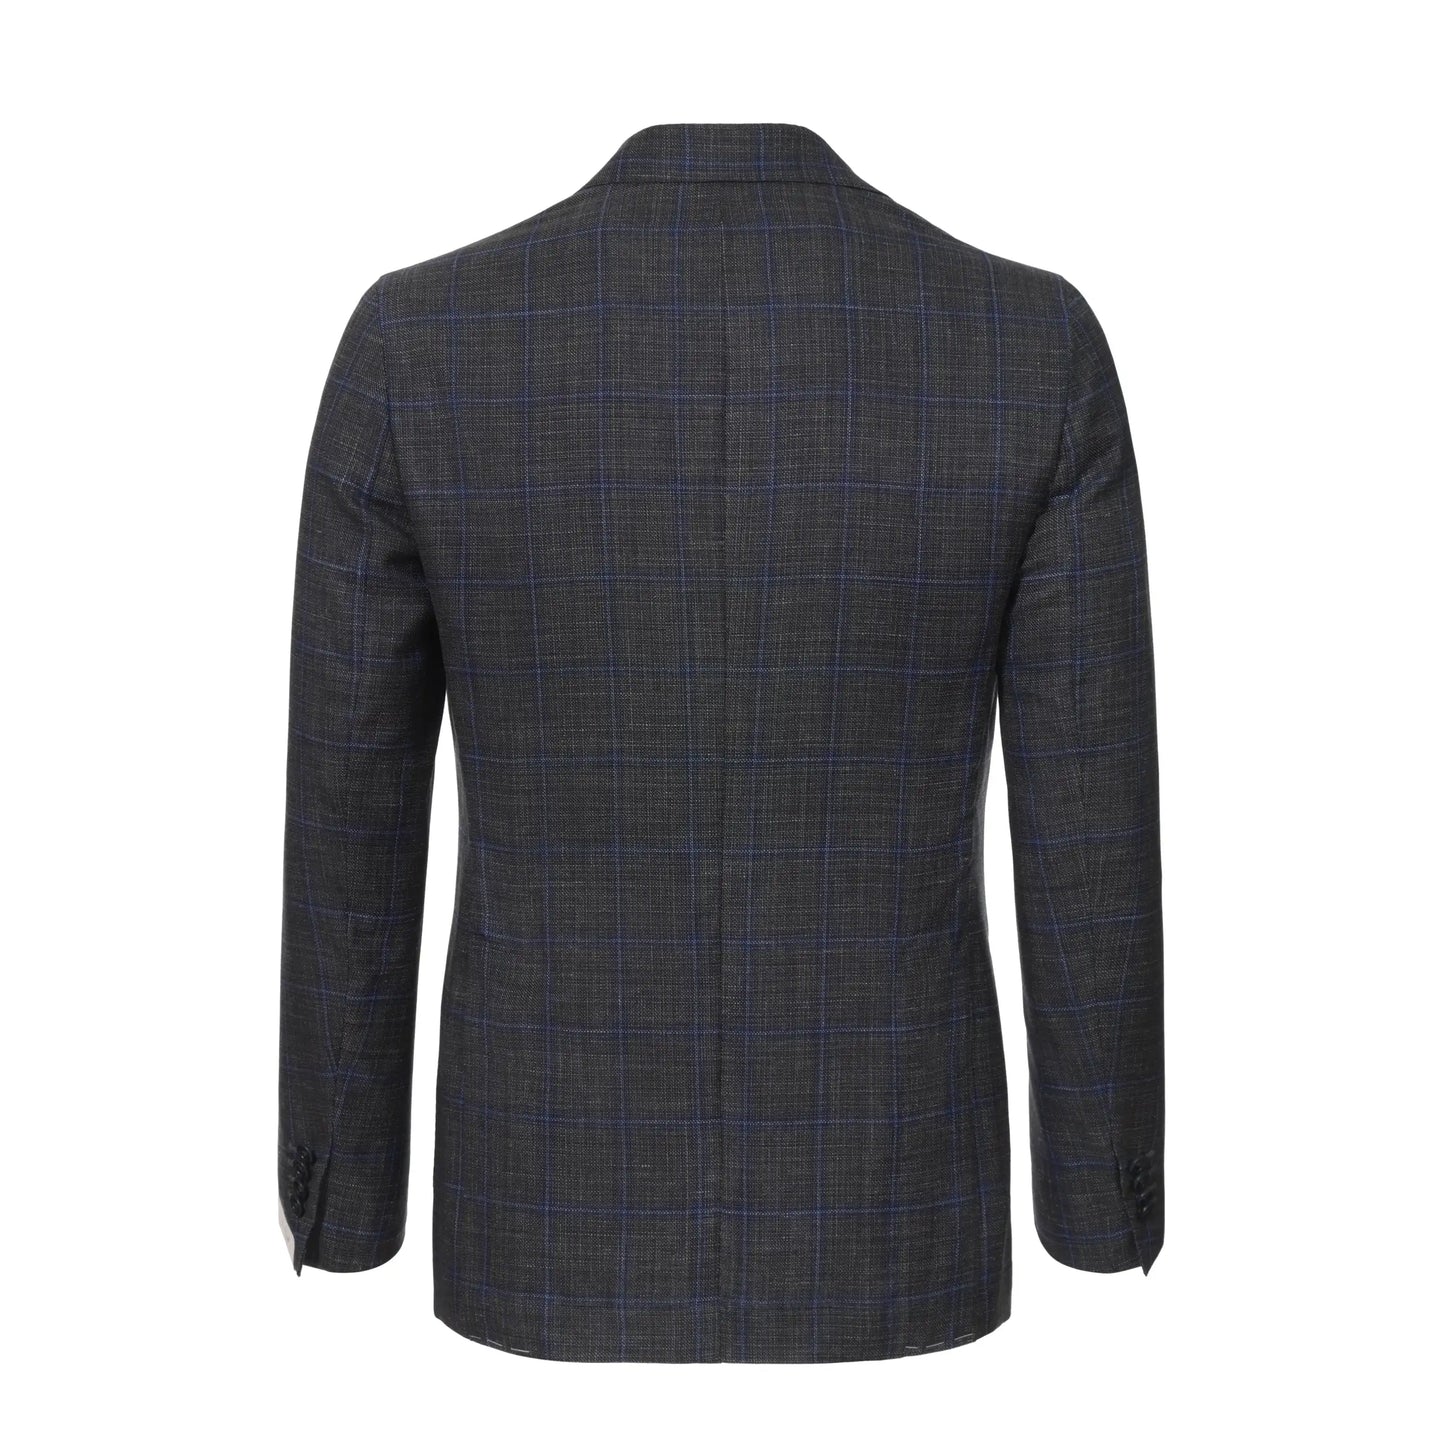 Single-Breasted Wool-Blend Jacket in Grey and Blue